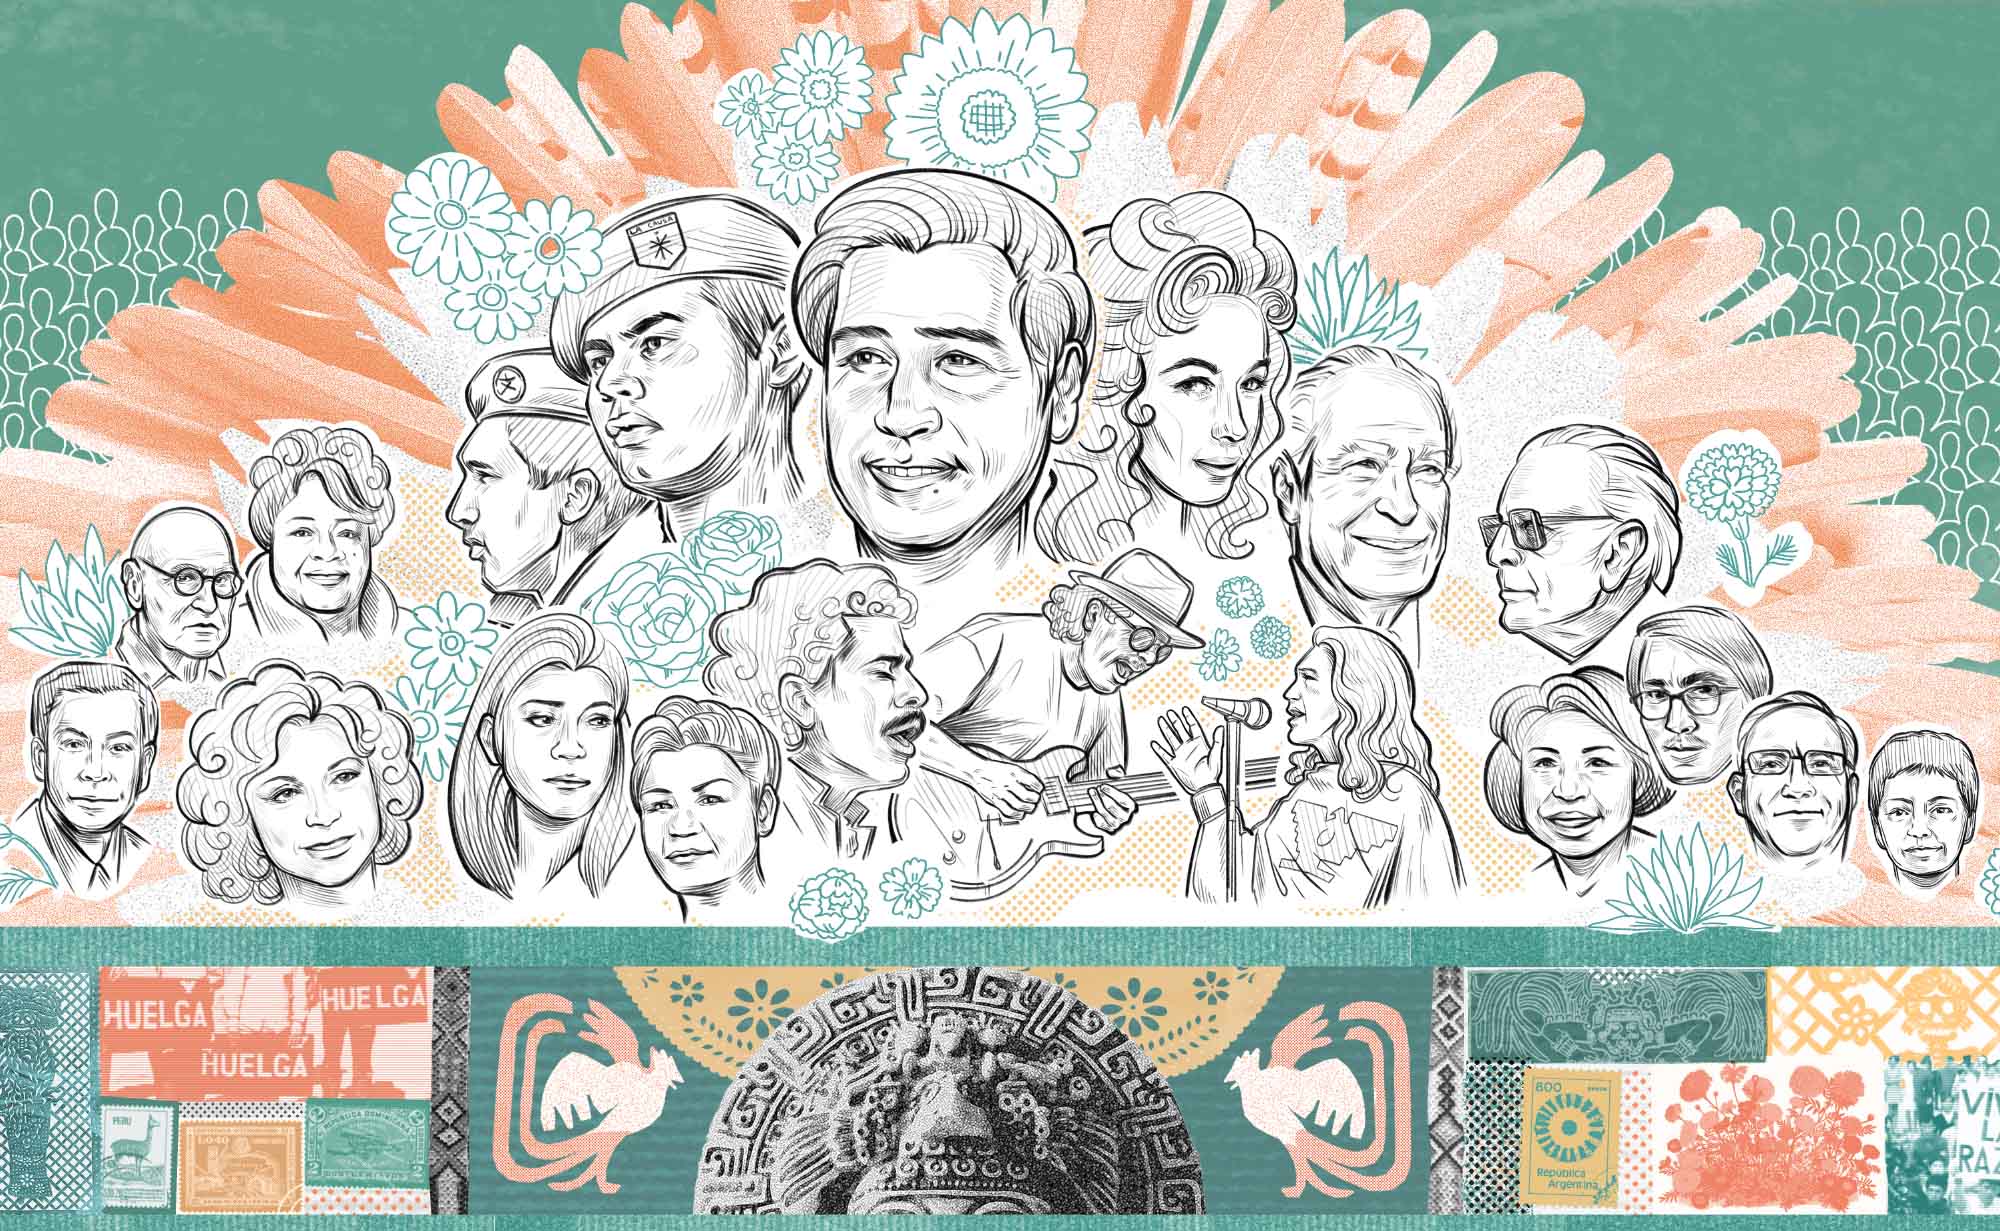 digital mural depiciting portraits of notal Latin American figures